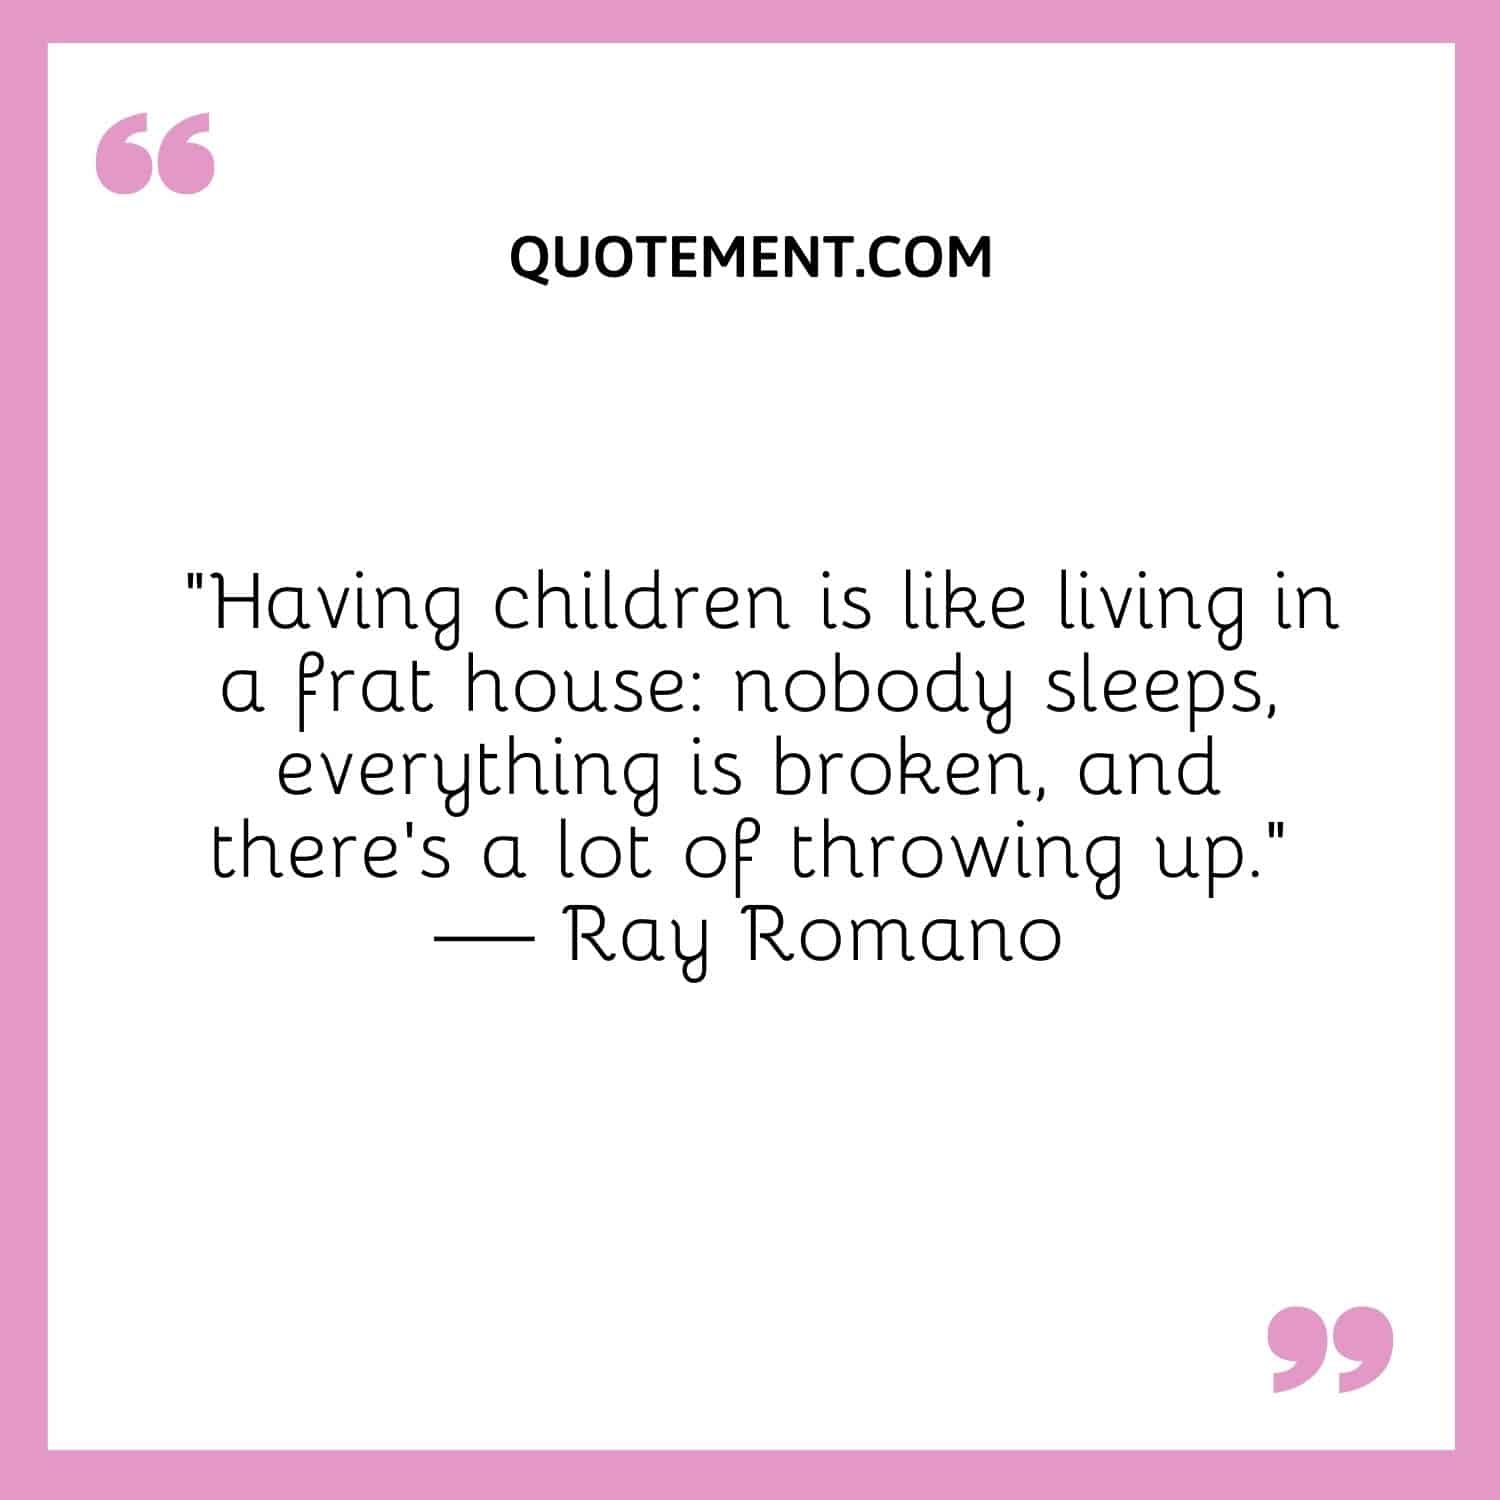 “Having children is like living in a frat house nobody sleeps, everything is broken, and there's a lot of throwing up.” — Ray Romano